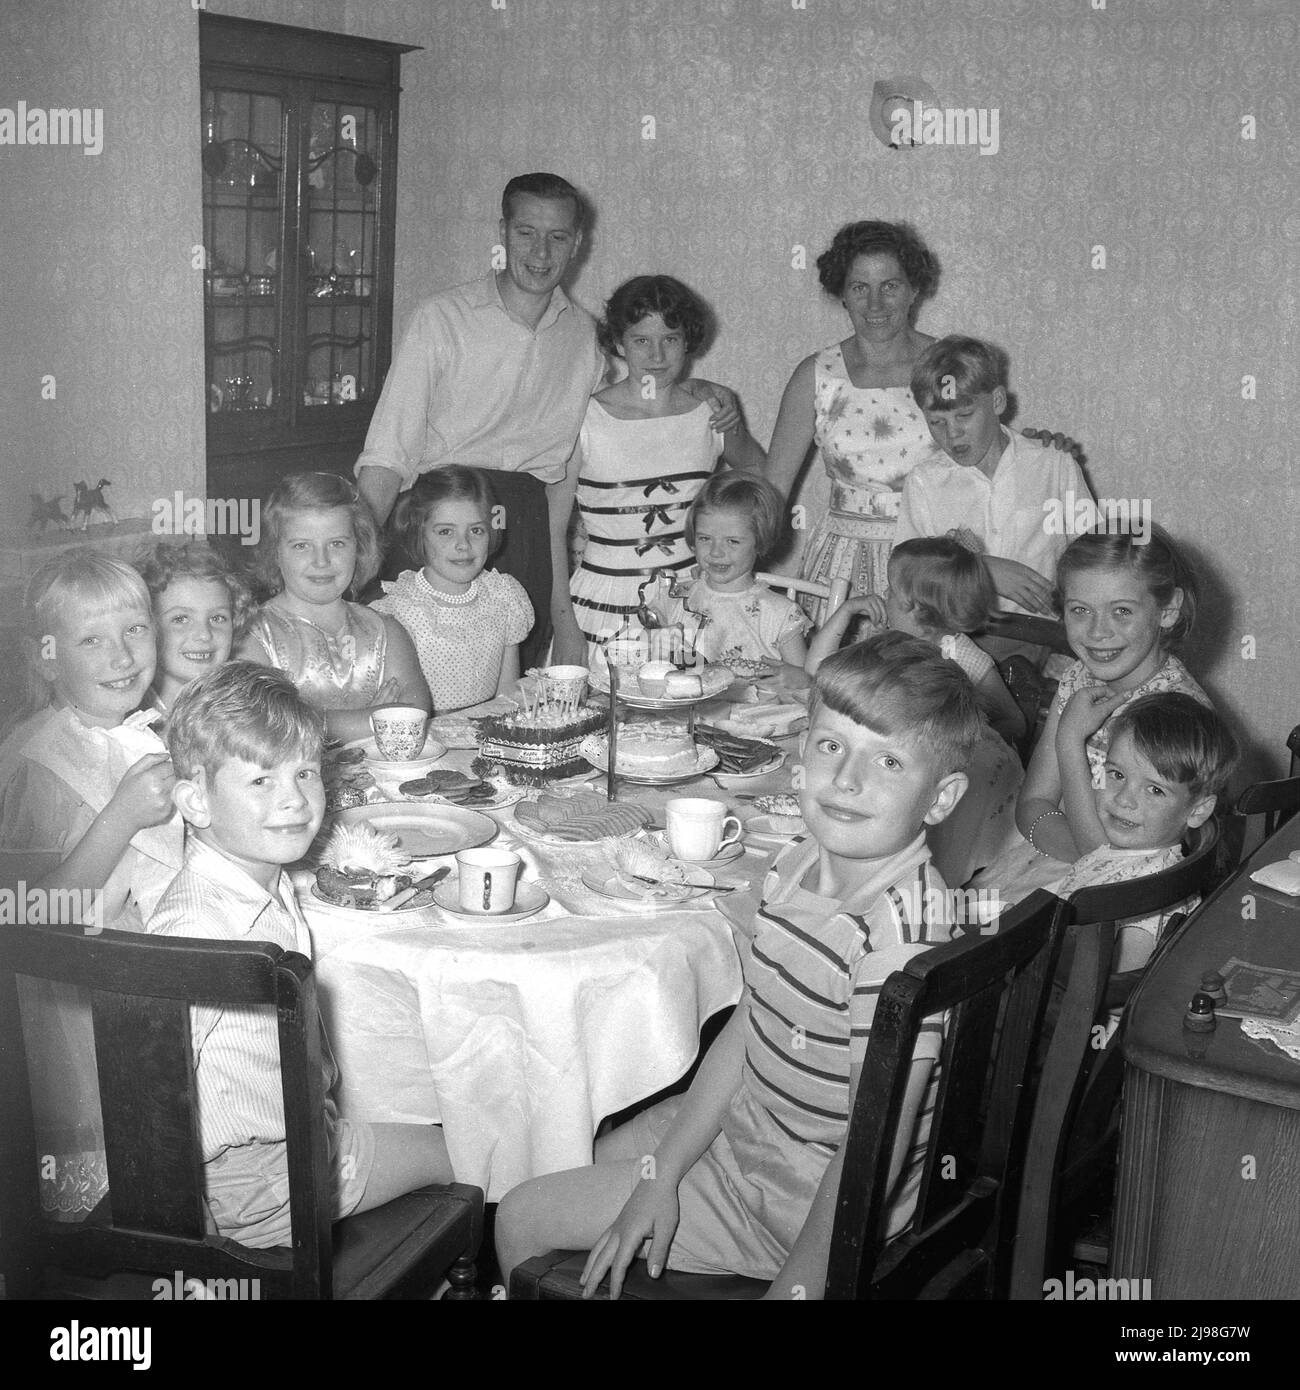 1961, historical, birthday, lovely smiles from a group of children sitting around a table enjoying a celebatory birthday tea party, with mum and dad standing by for a group photo, England, UK. Stock Photo